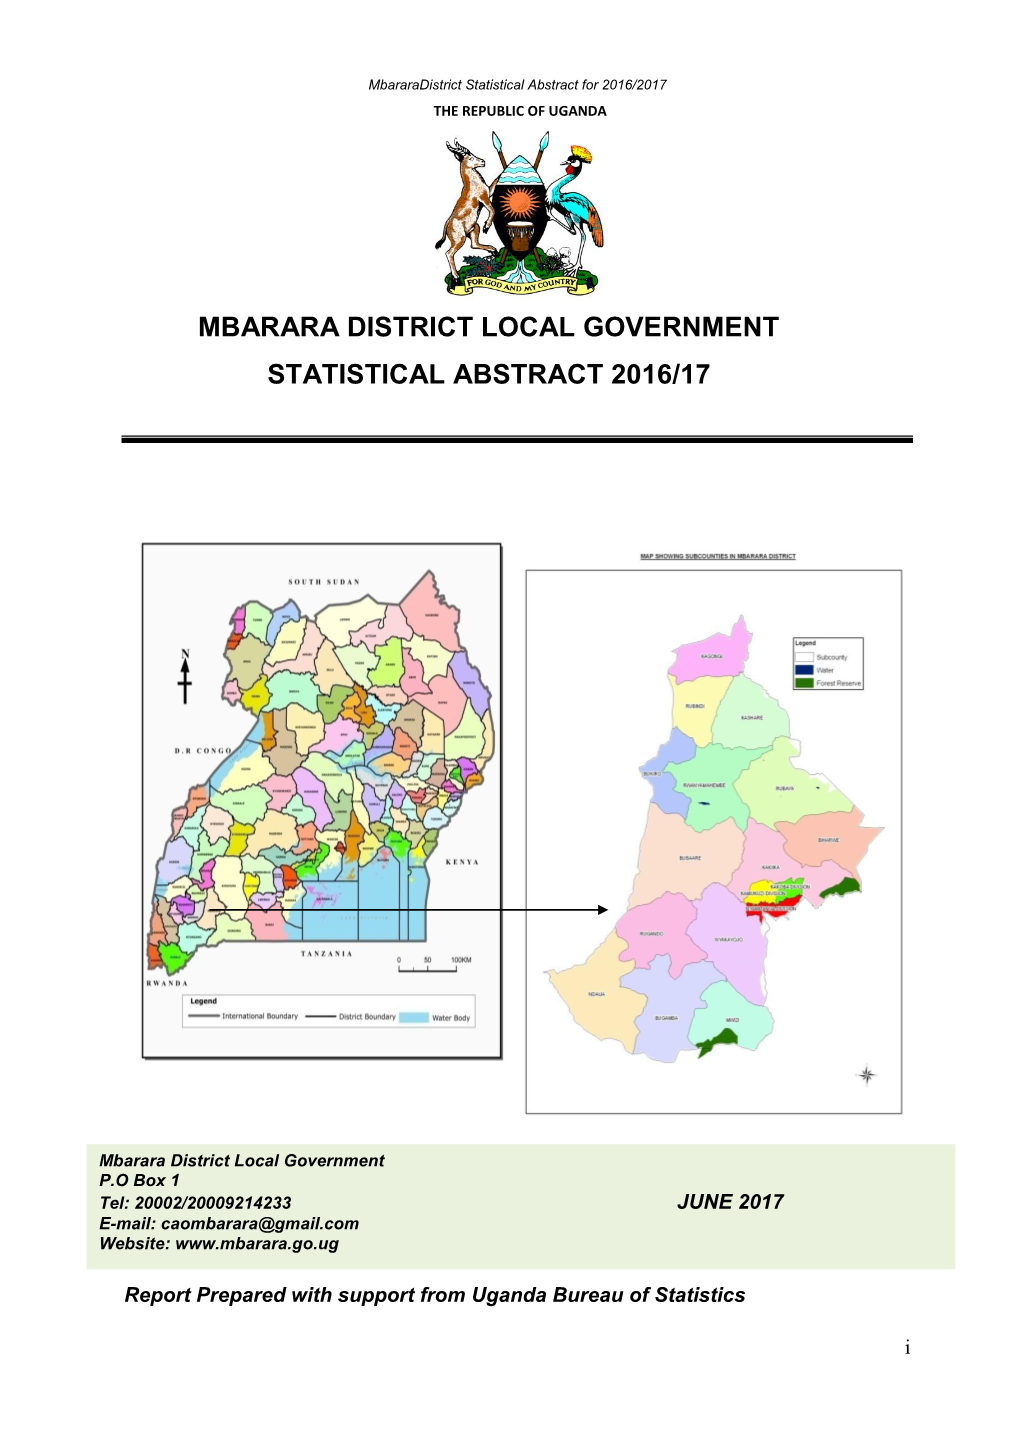 Mbarara District Local Government Statistical Abstract 2016/17